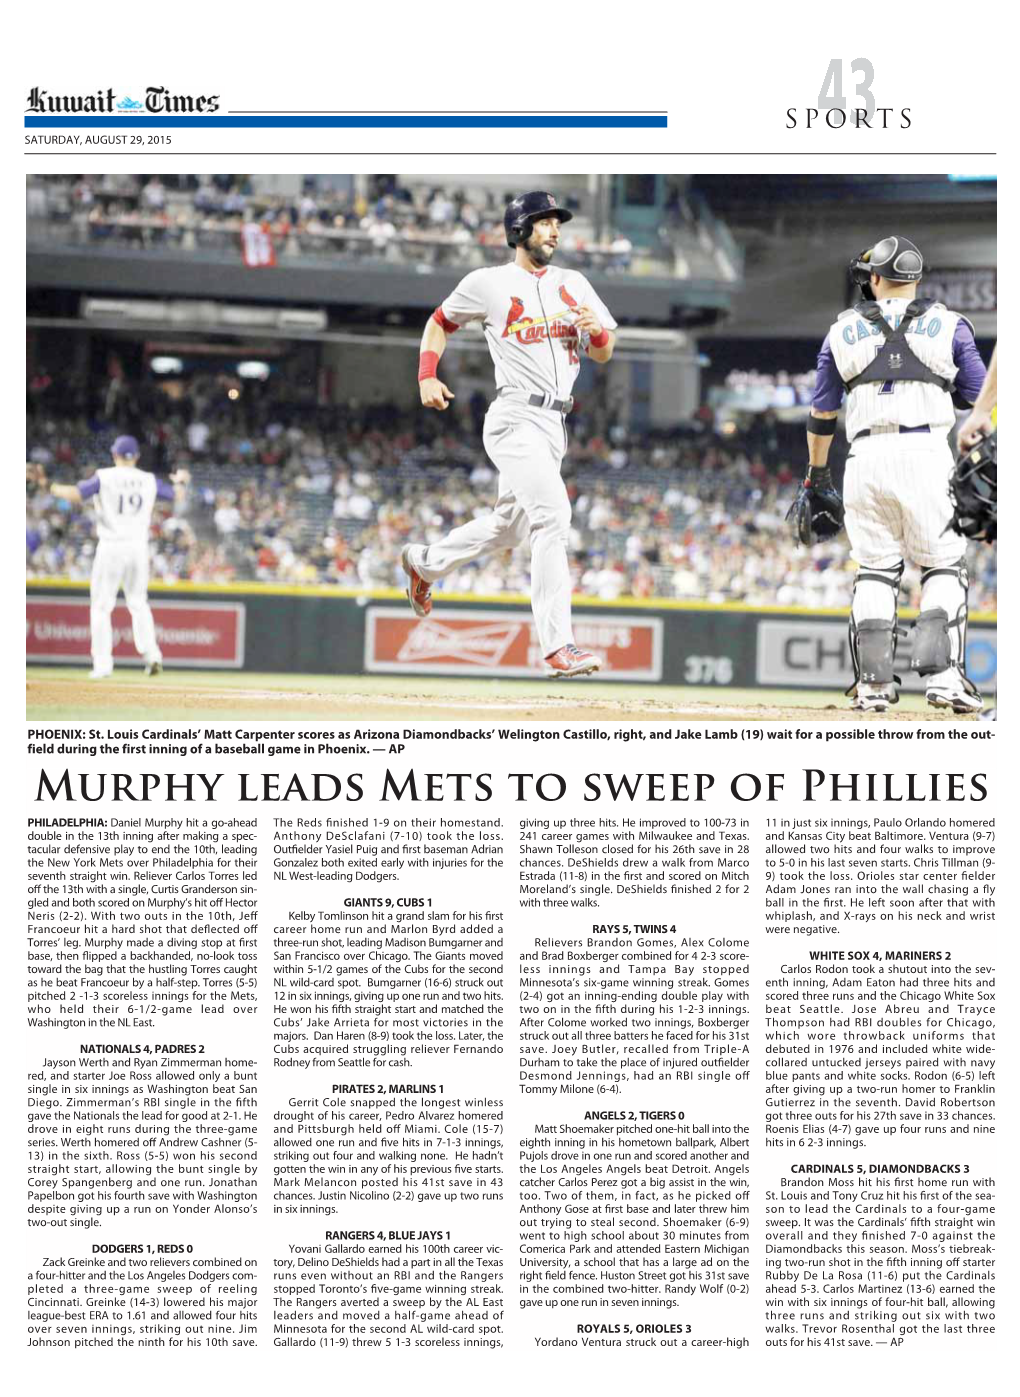 Murphy Leads Mets to Sweep of Phillies